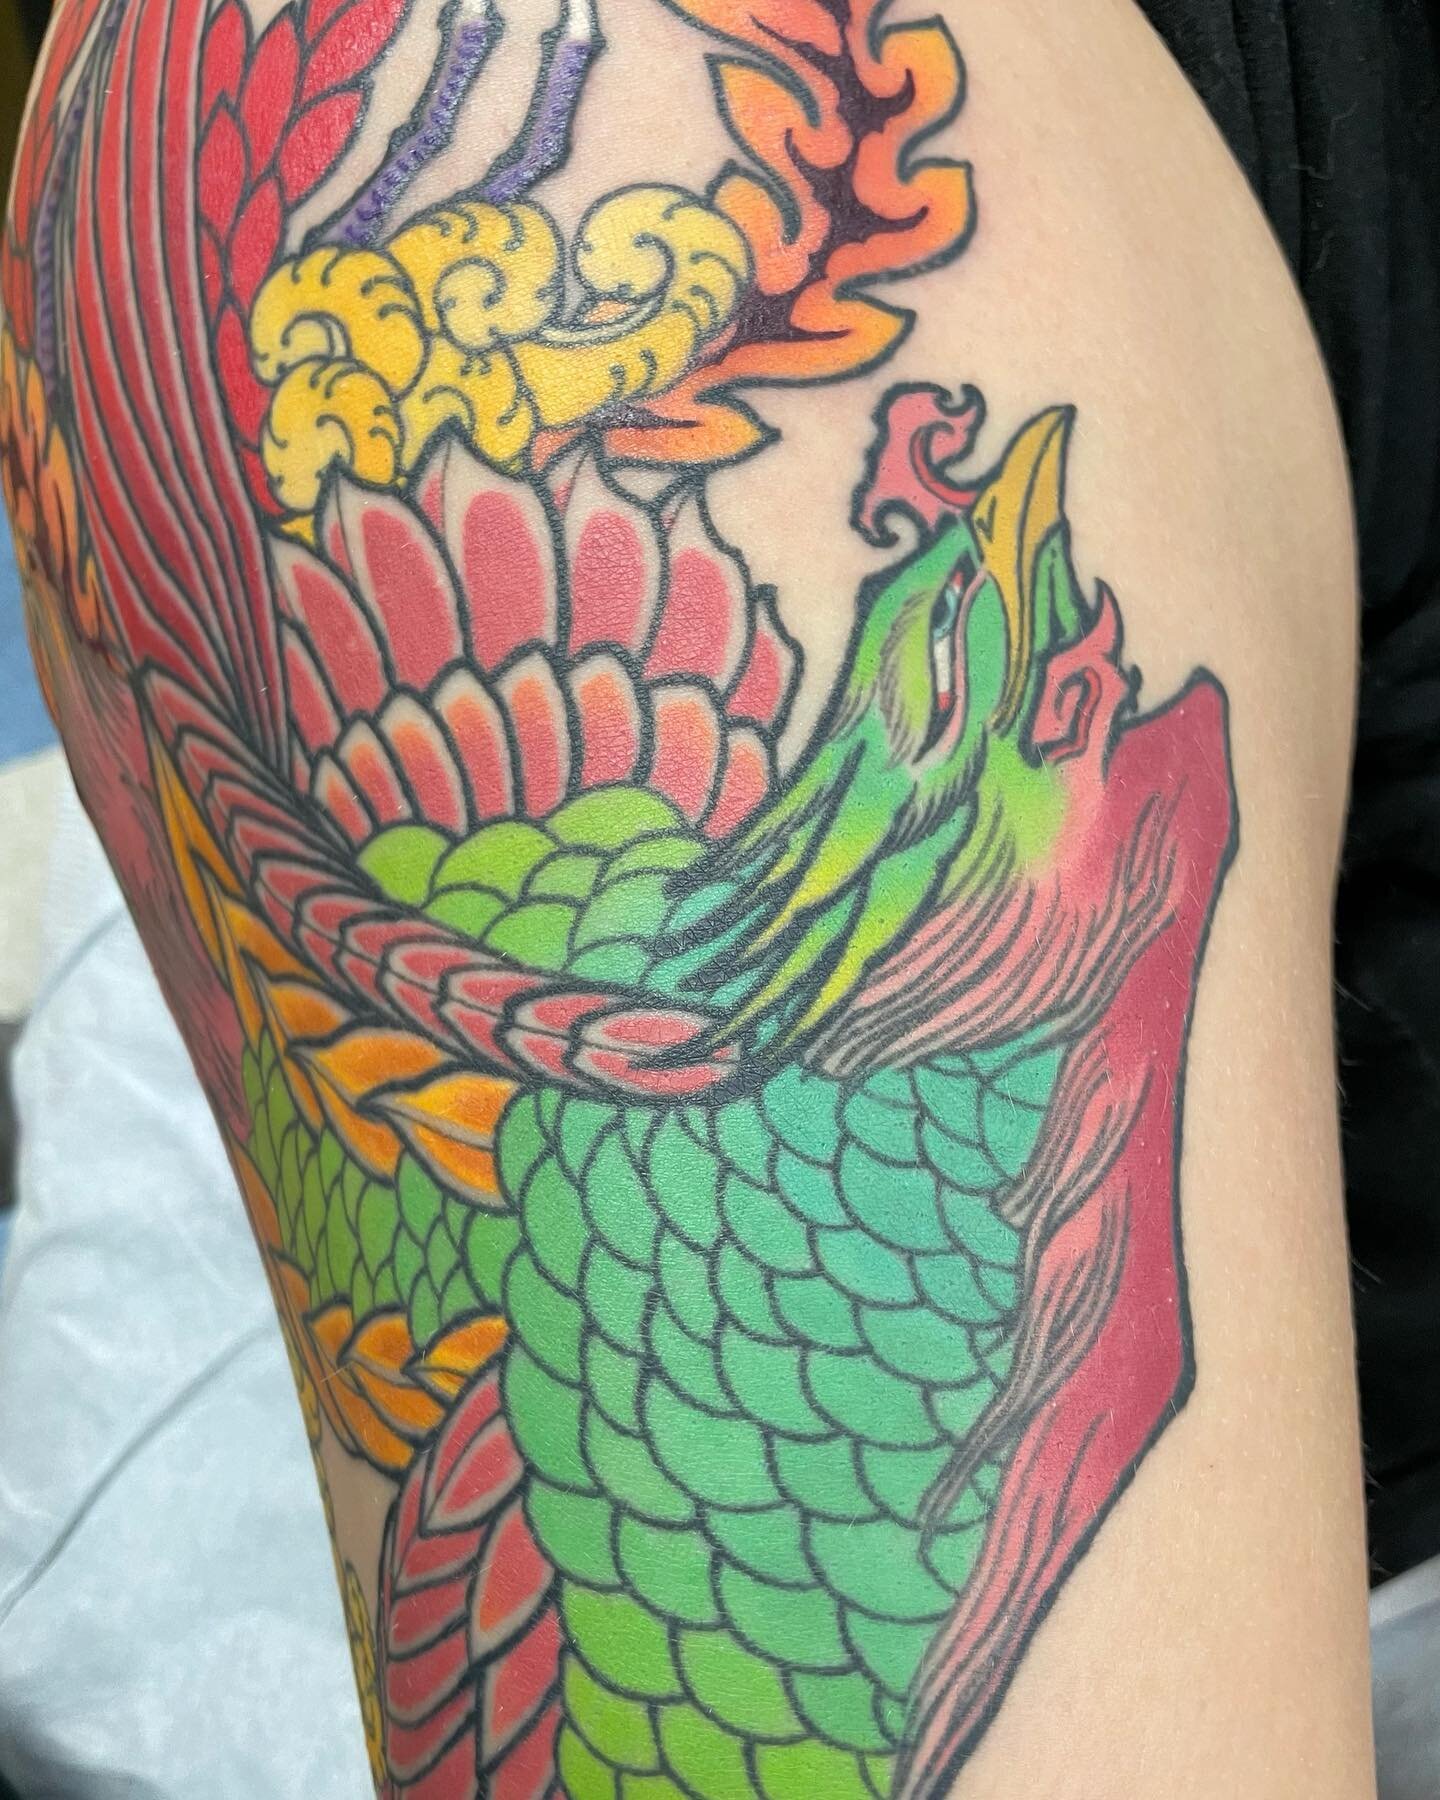 Final session to complete this Phoenix. Great project for a dedicated client. Thank you!

*****************************
🍒🎲 @hotlinetattoo 🎲🍒

&bull;
&bull;
&bull;
&bull;
&bull;
&bull;
&bull;
&bull;
&bull;

#japanesetattoo#japaneseart#japanesestyl